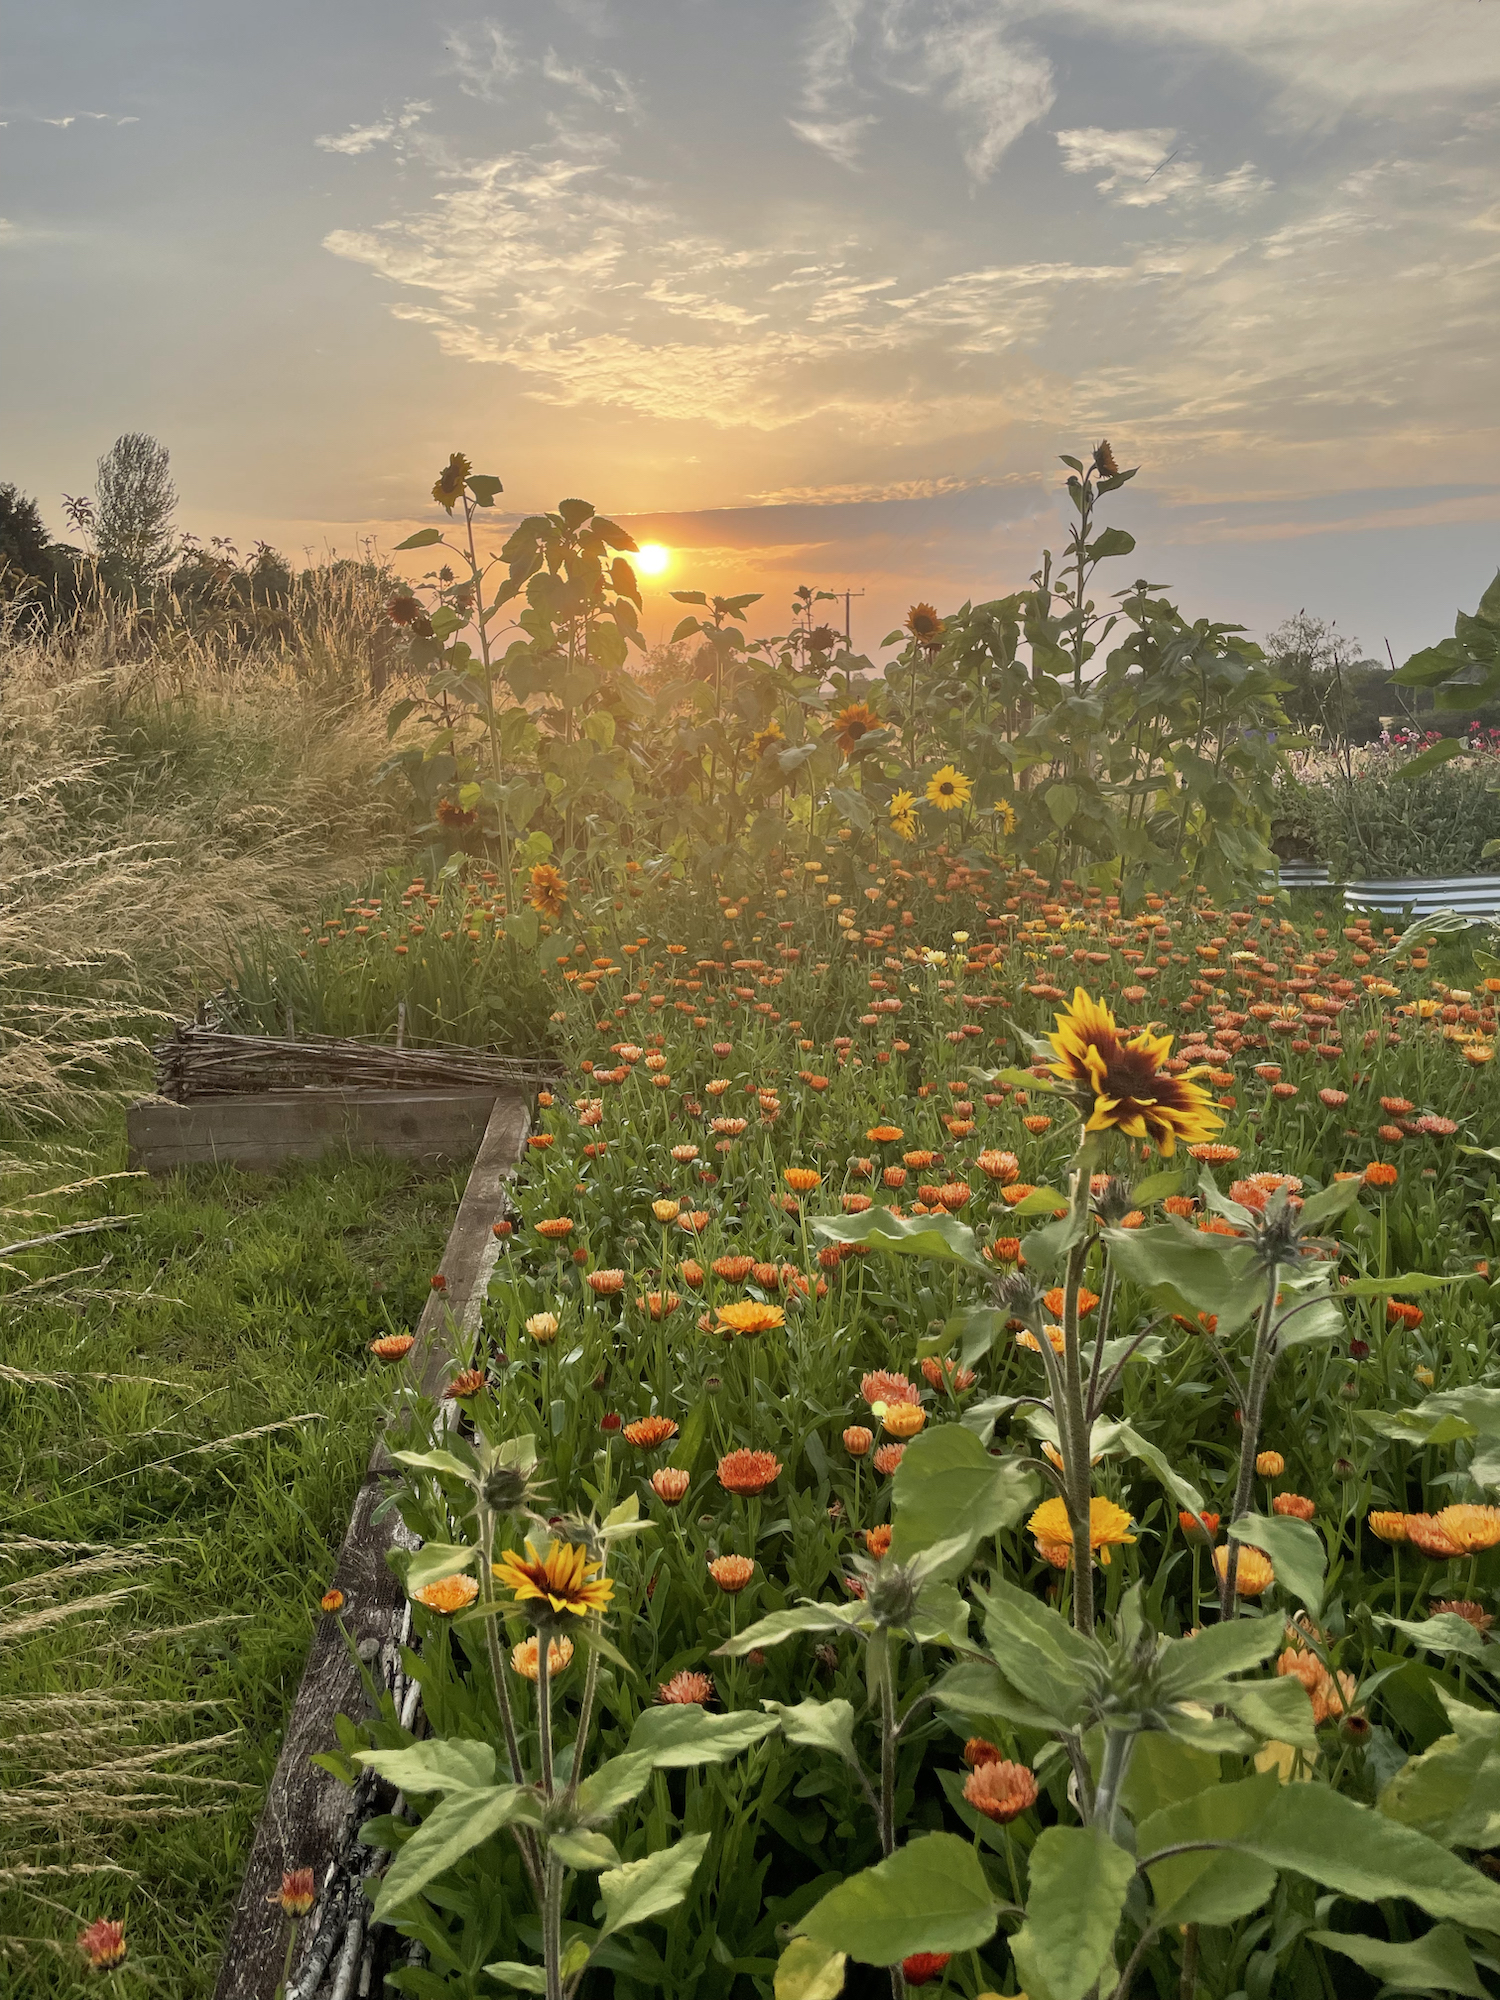 Sea of tagetes, sunflower growing in productive garden beneath warm sunset 